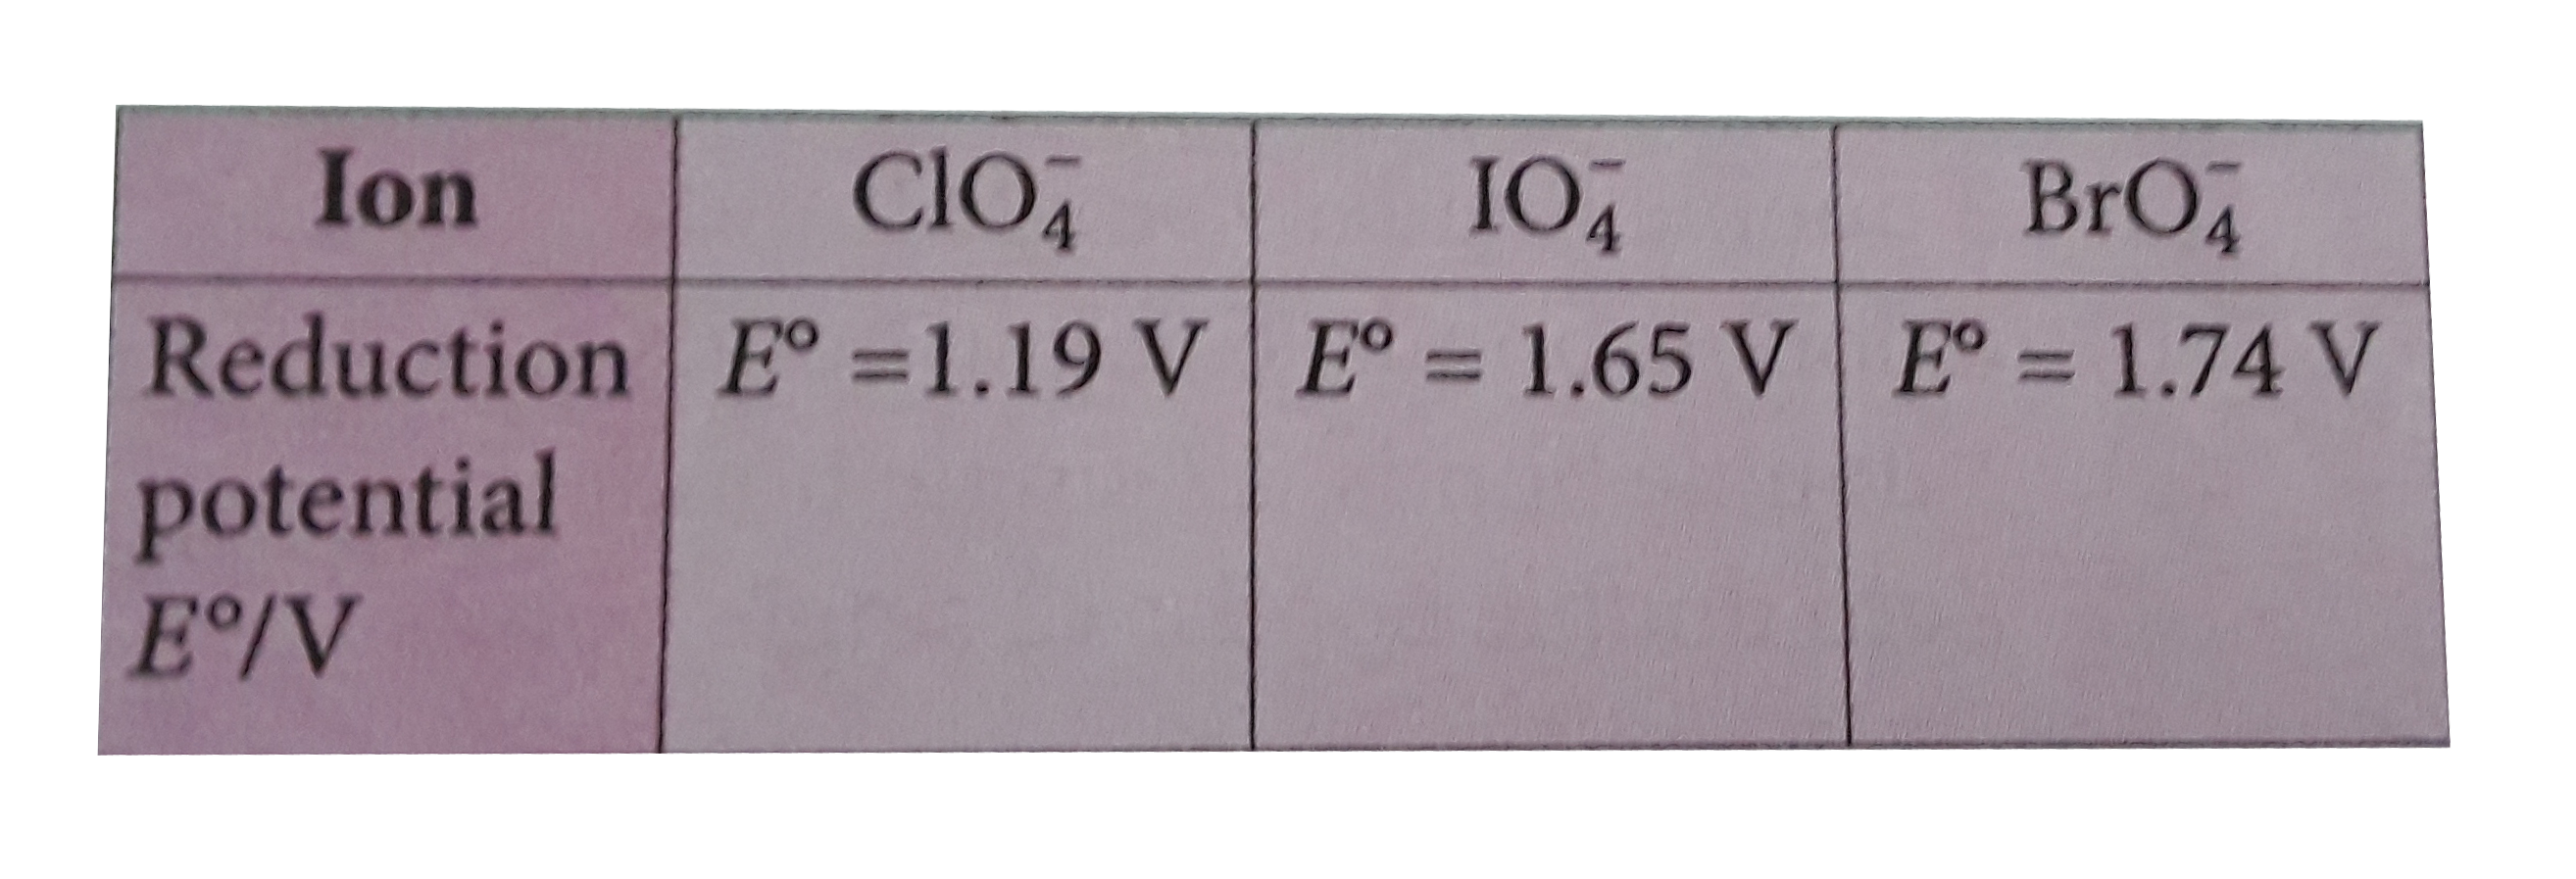 Reduction potentials of some ions are given below. Arrange them in decreasing order of oxidising power.